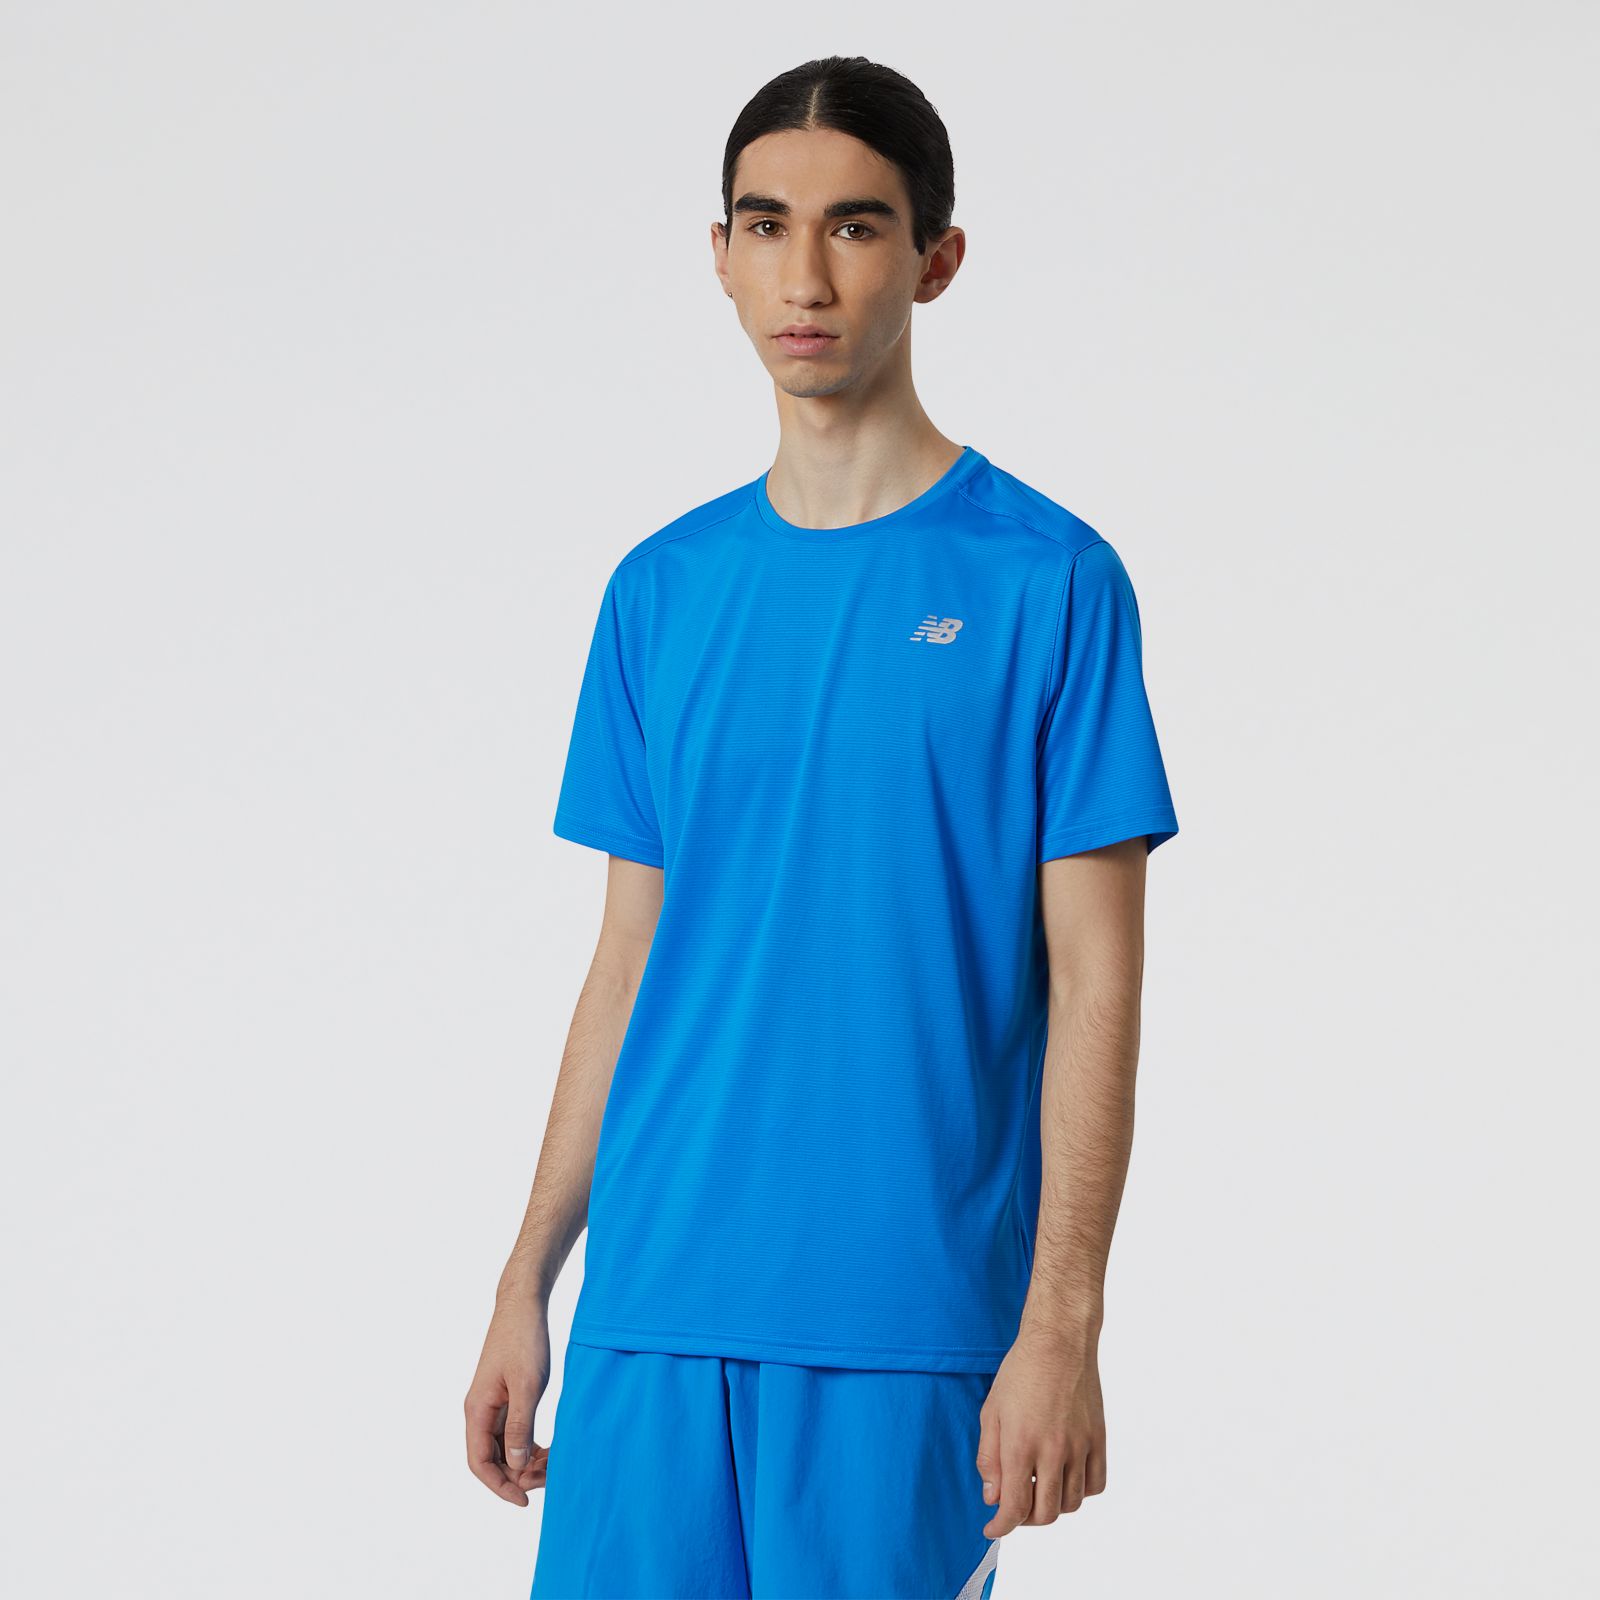 New Balance Accelerate Short Sleeve MT03203, Royal, swatch